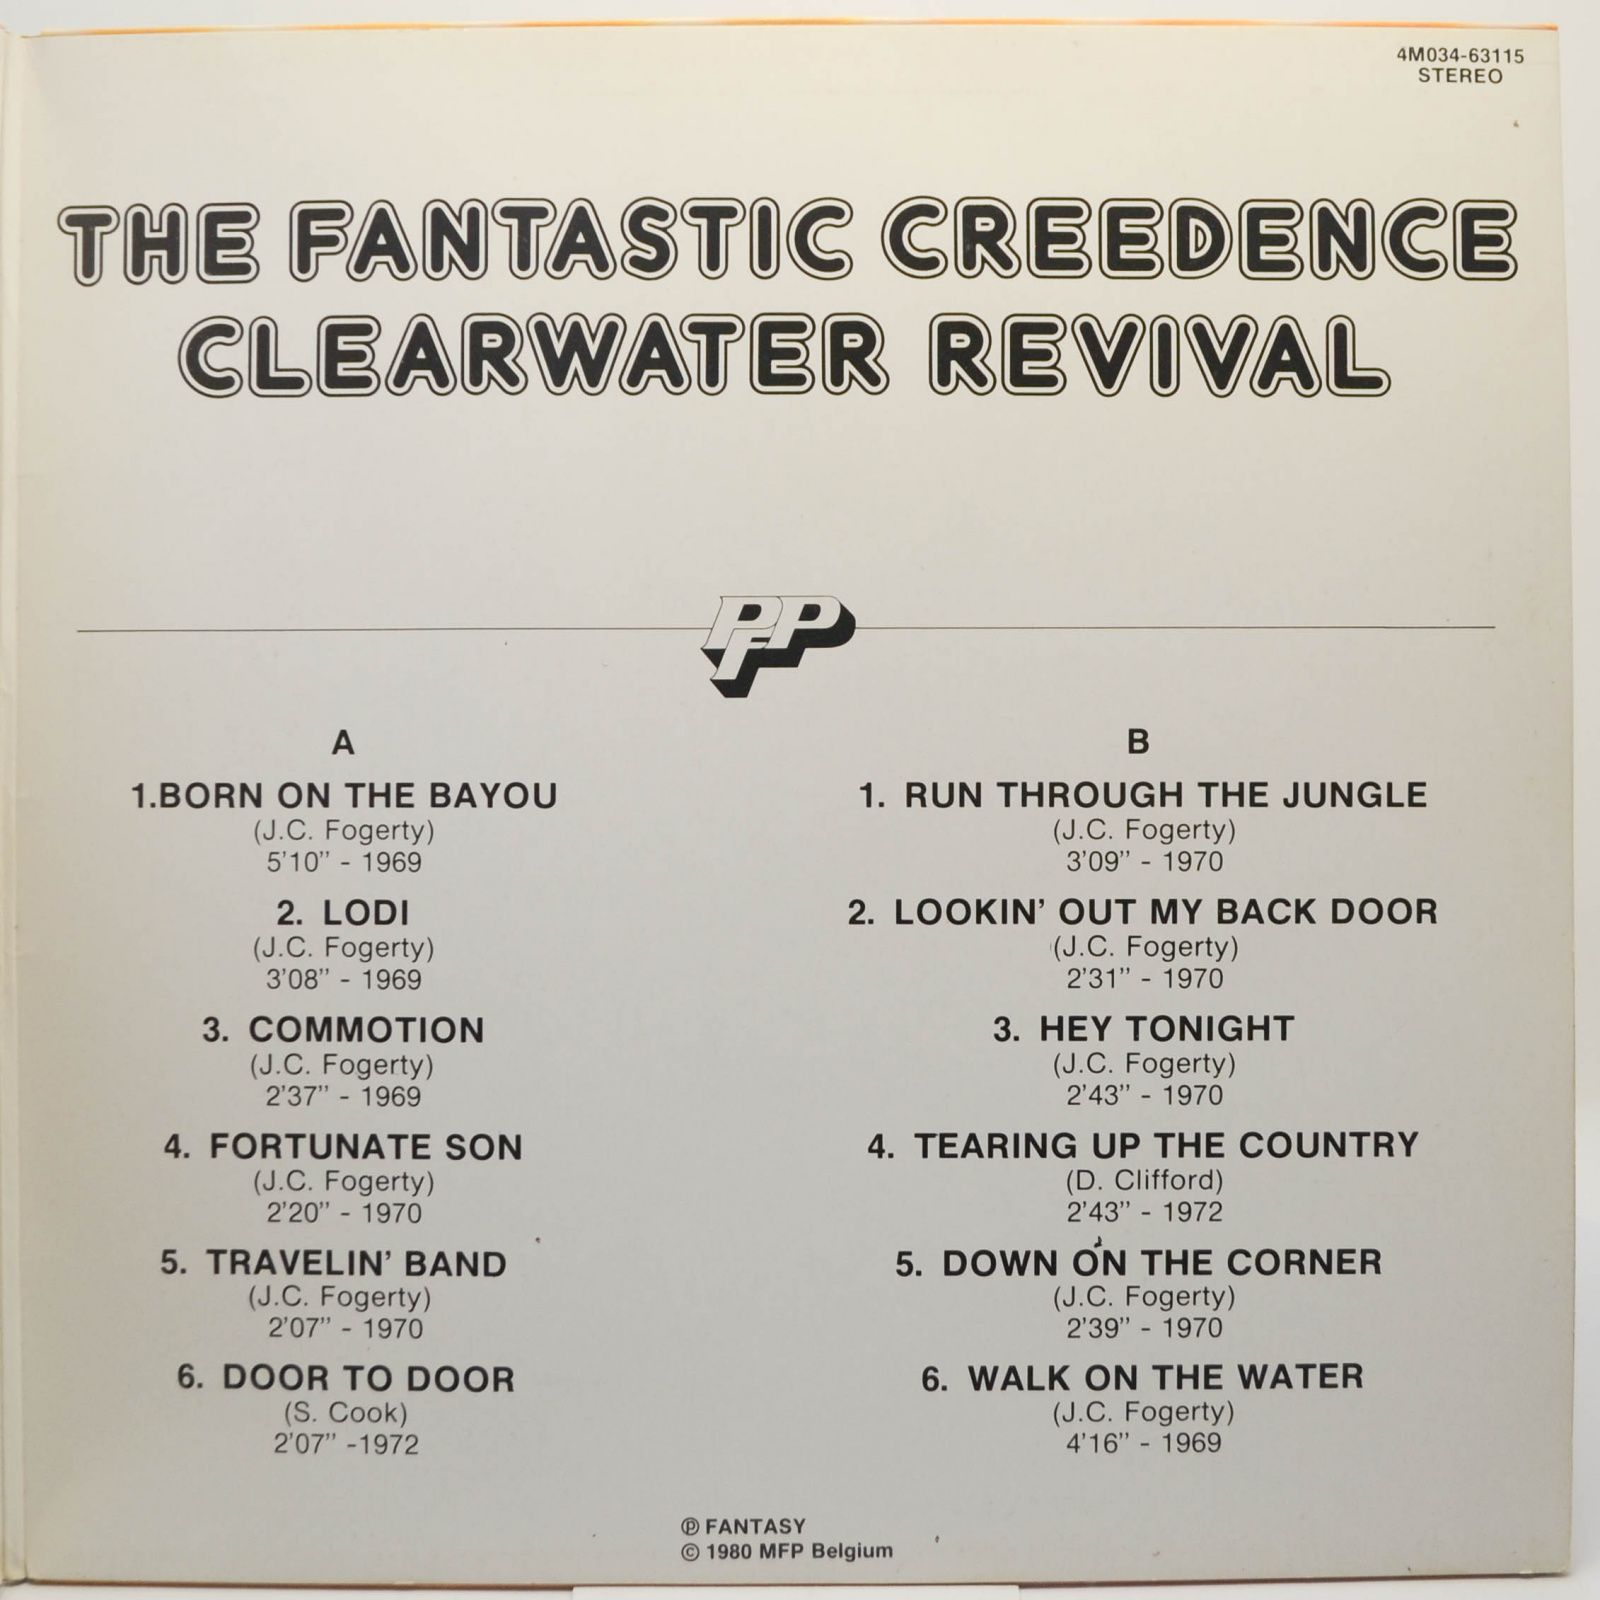 Creedence Clearwater Revival — The Fantastic Creedence Clearwater Revival, 1980